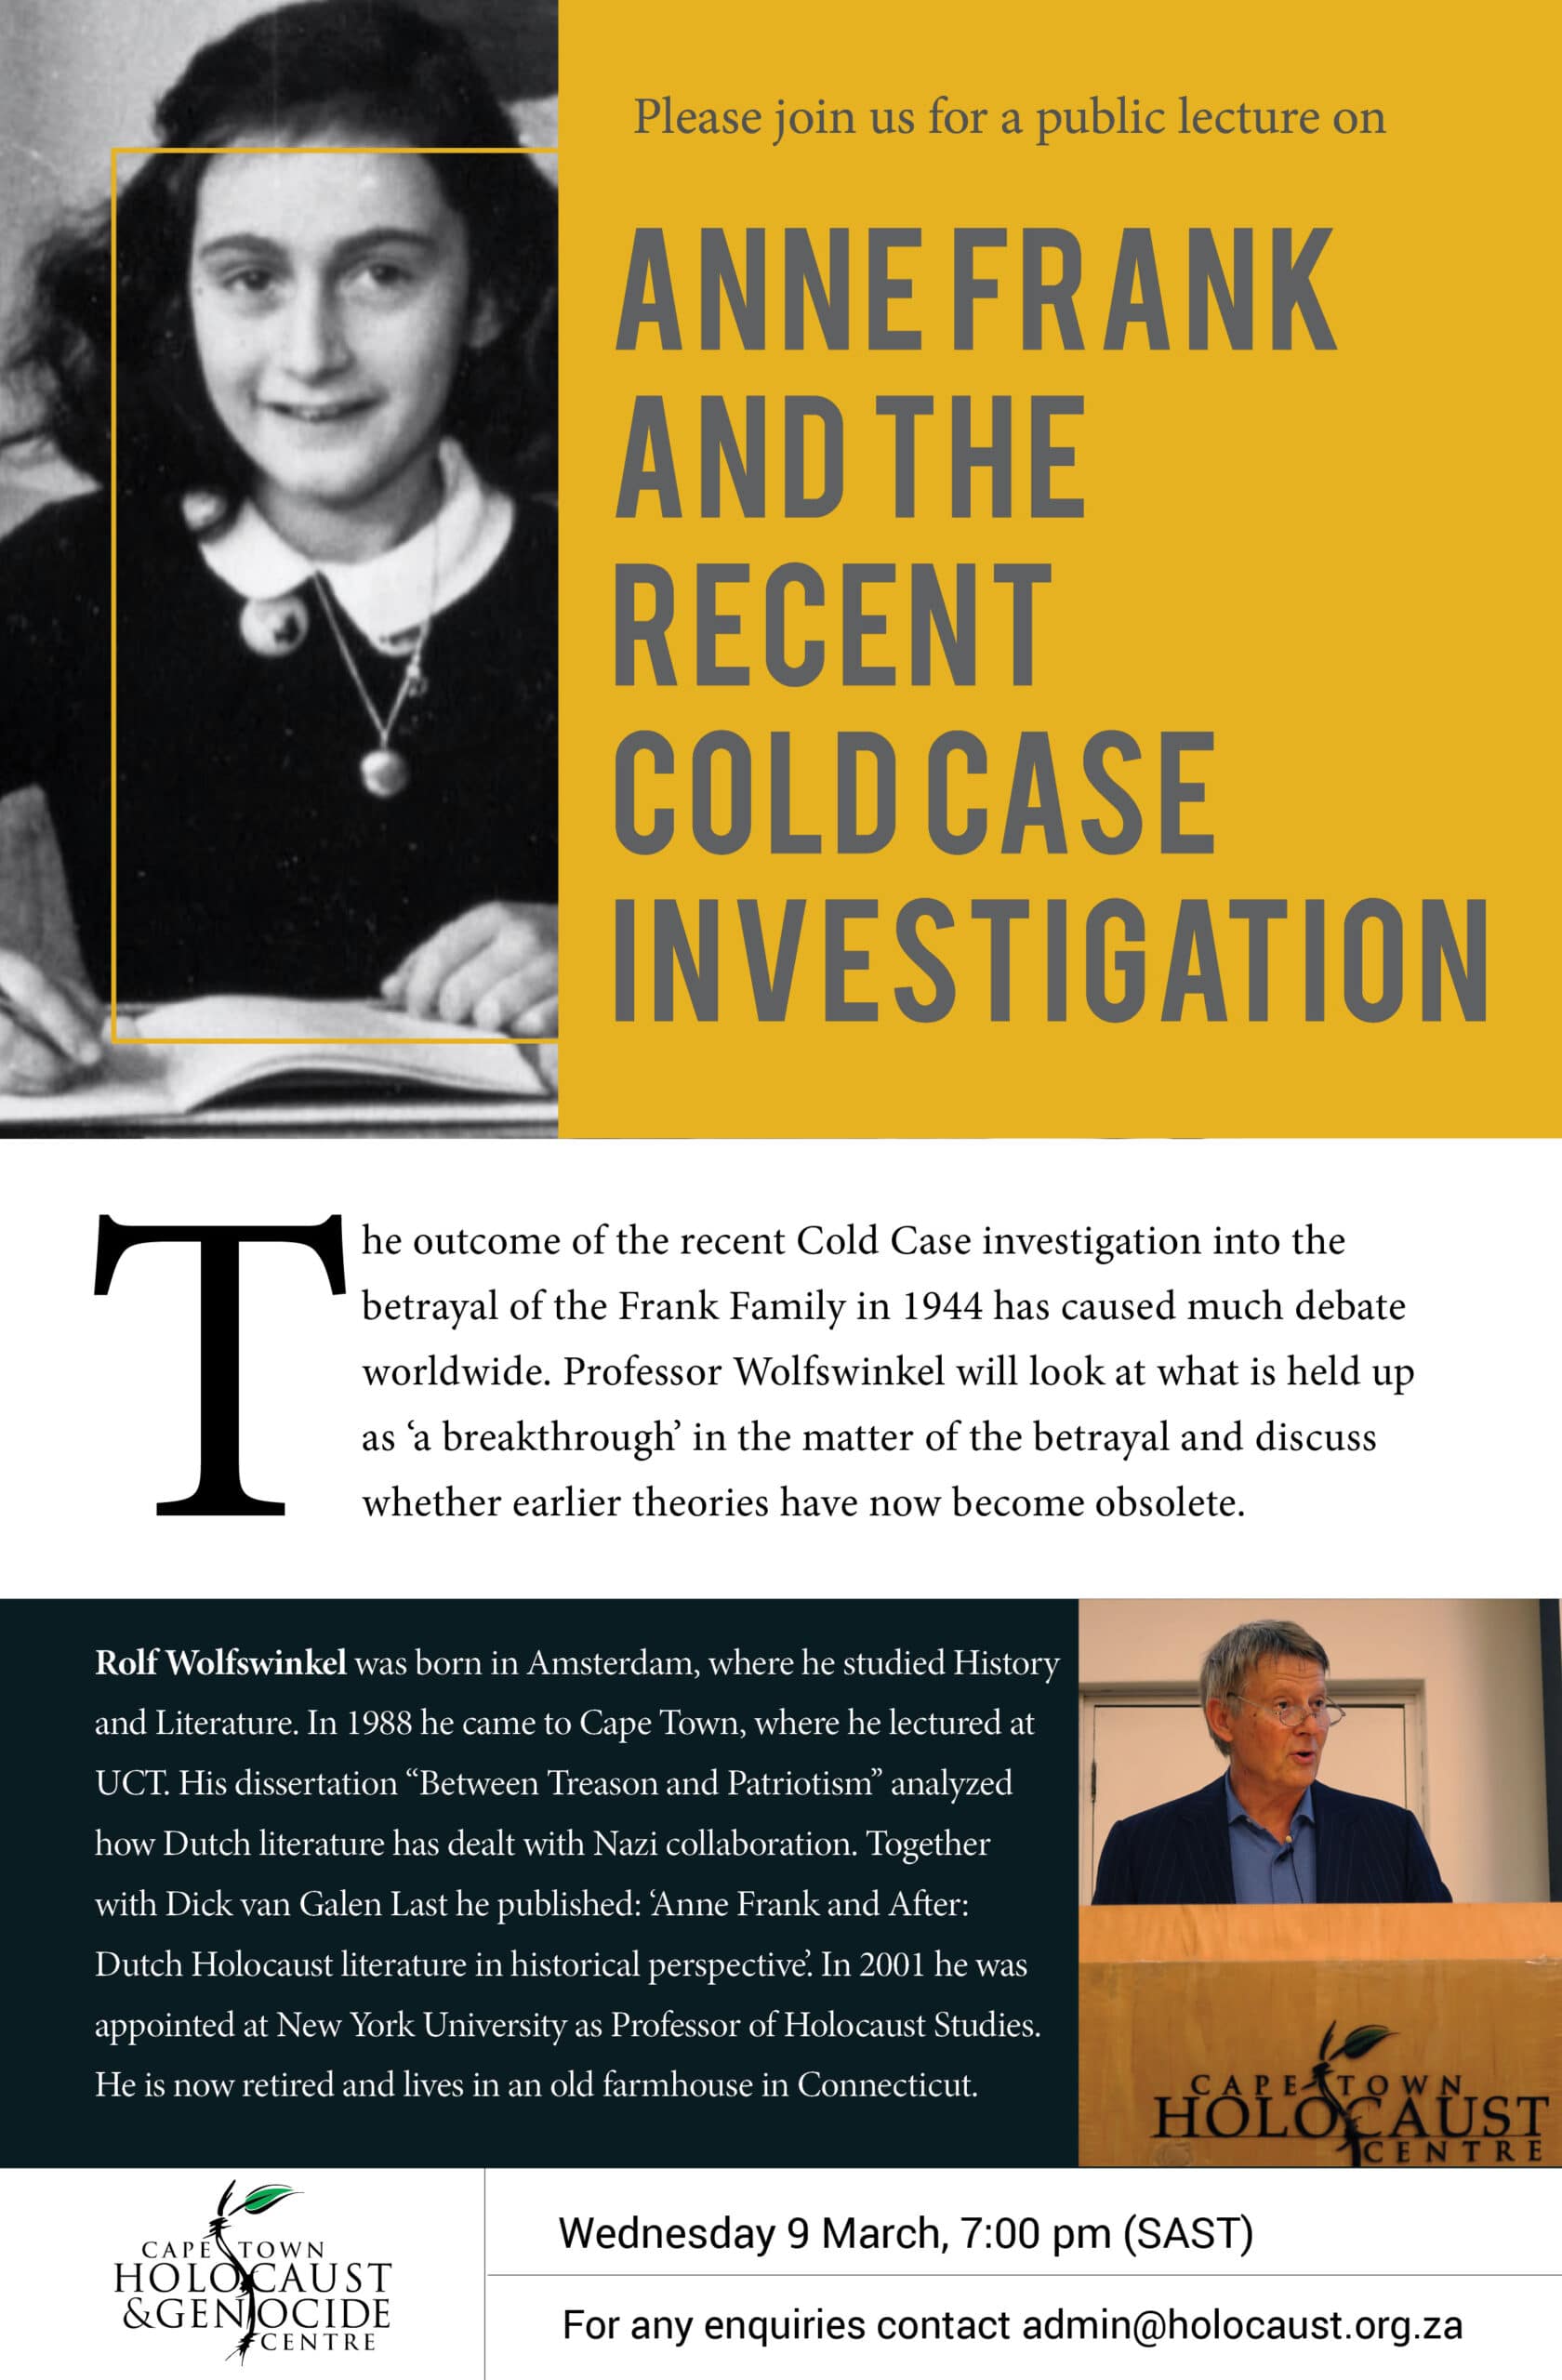 Anne Frank and the recent Cold Case Investigation by Dr Rolf Wolfswinkel